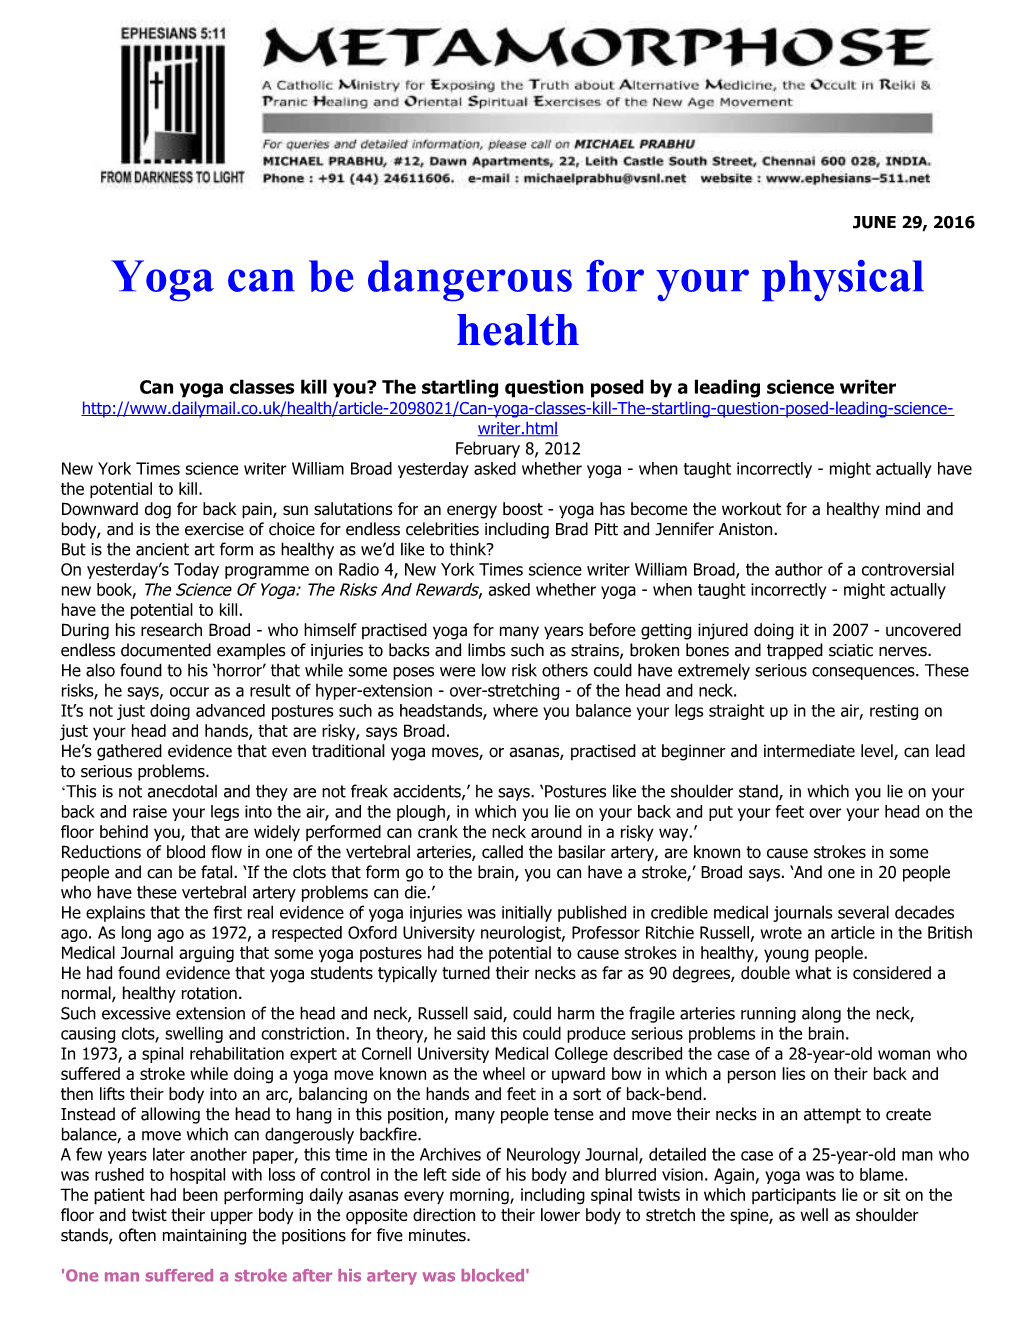 Yoga Can Be Dangerous for Your Physical Health